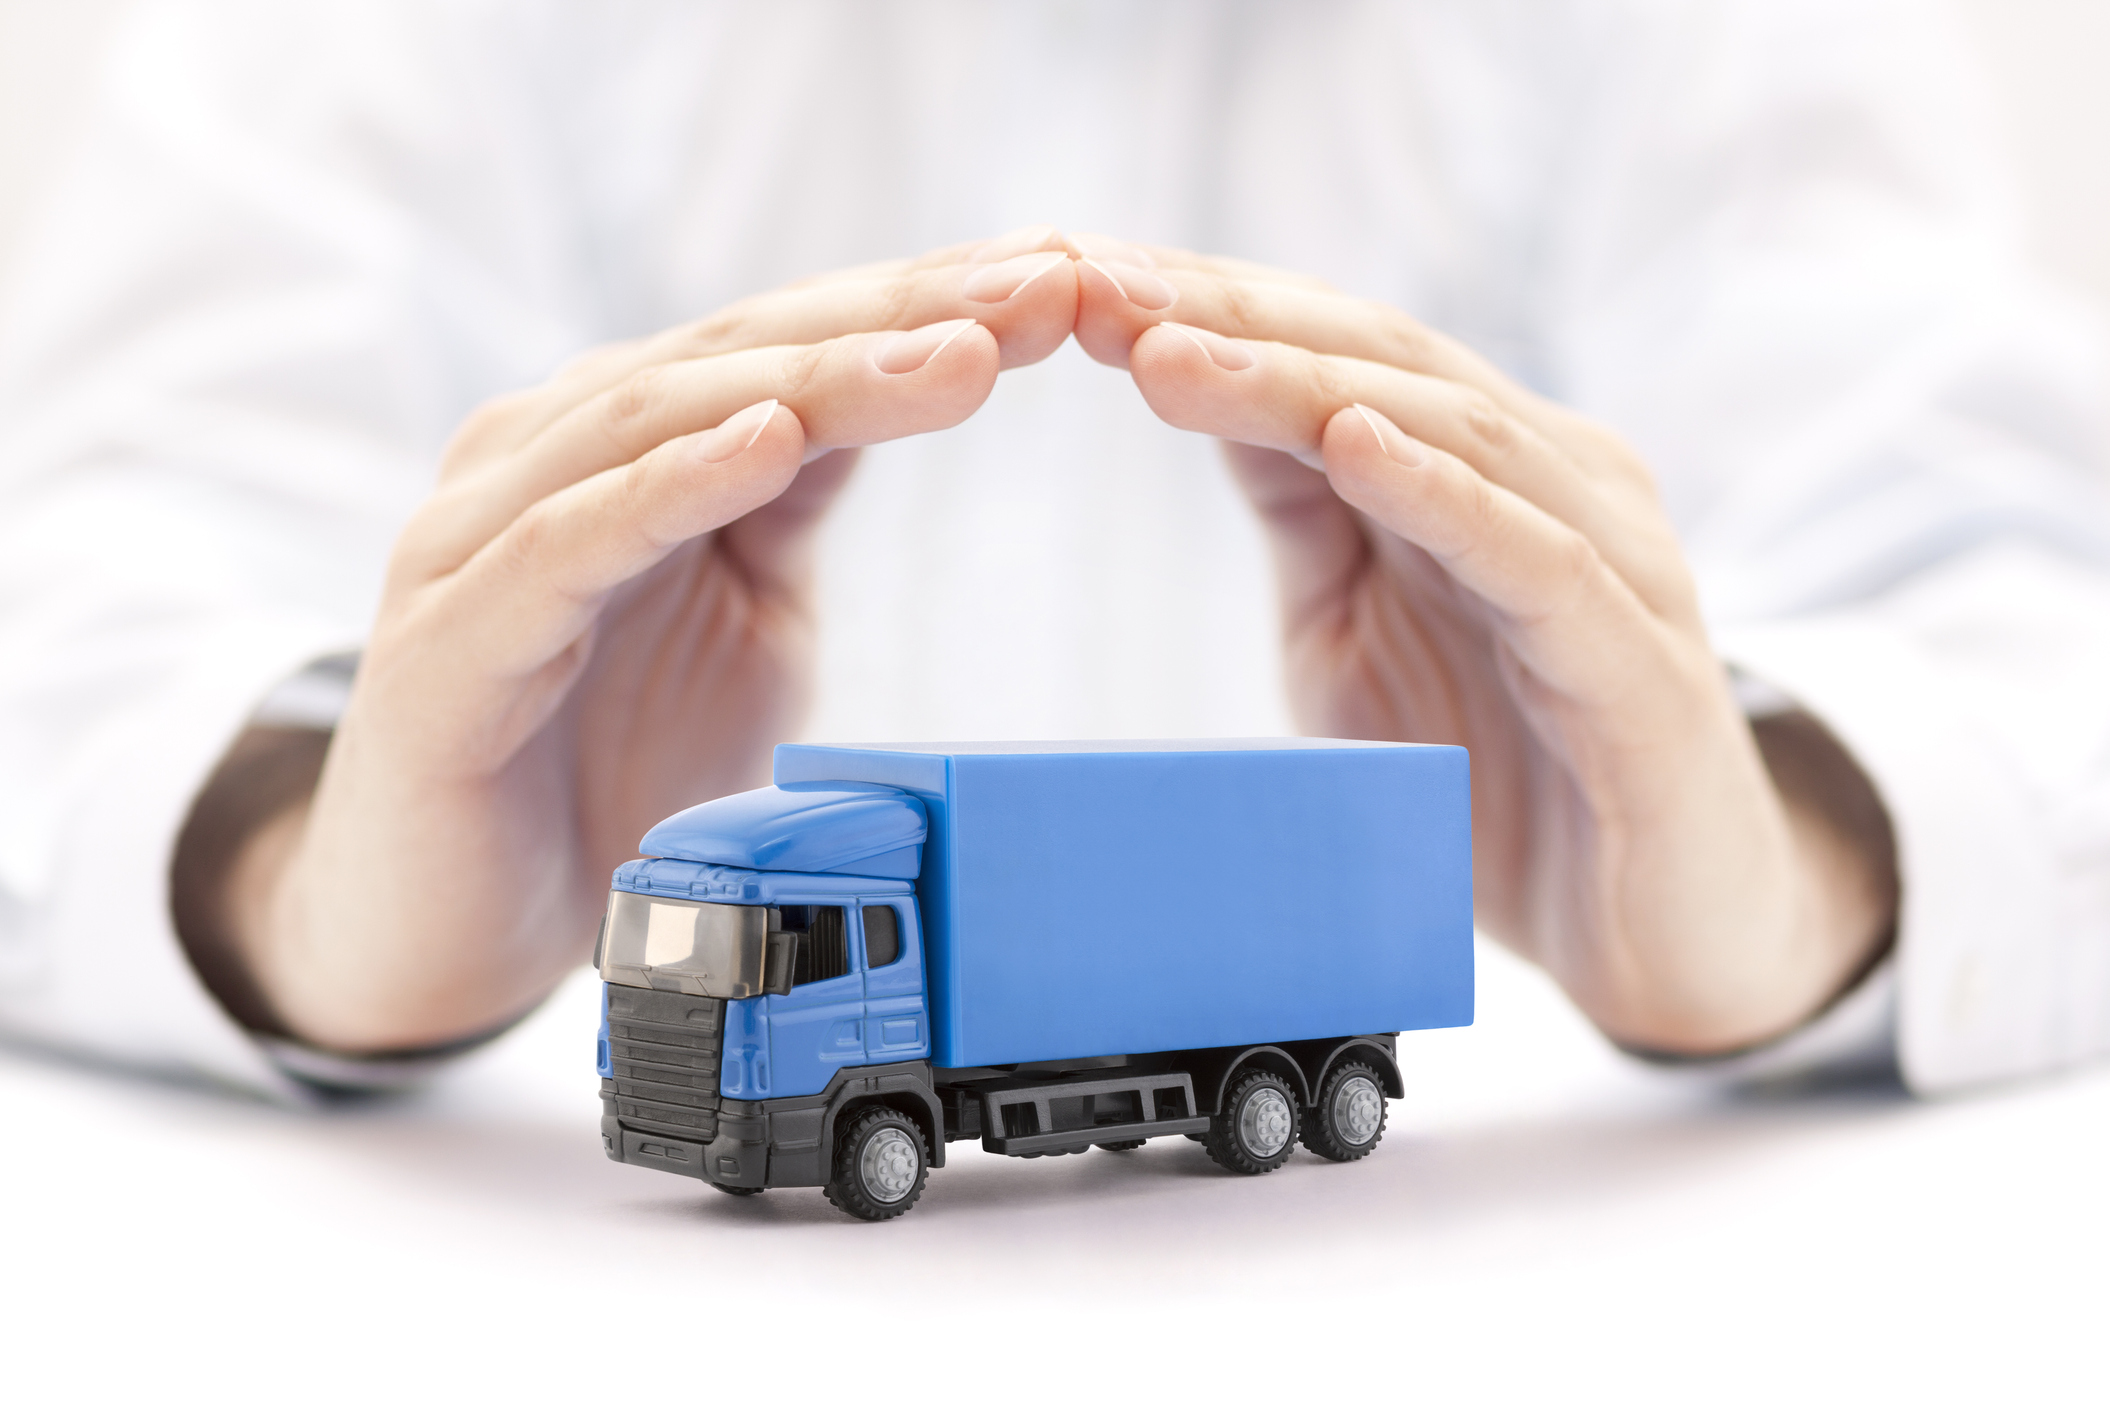 A person holds their hands over a blue toy truck